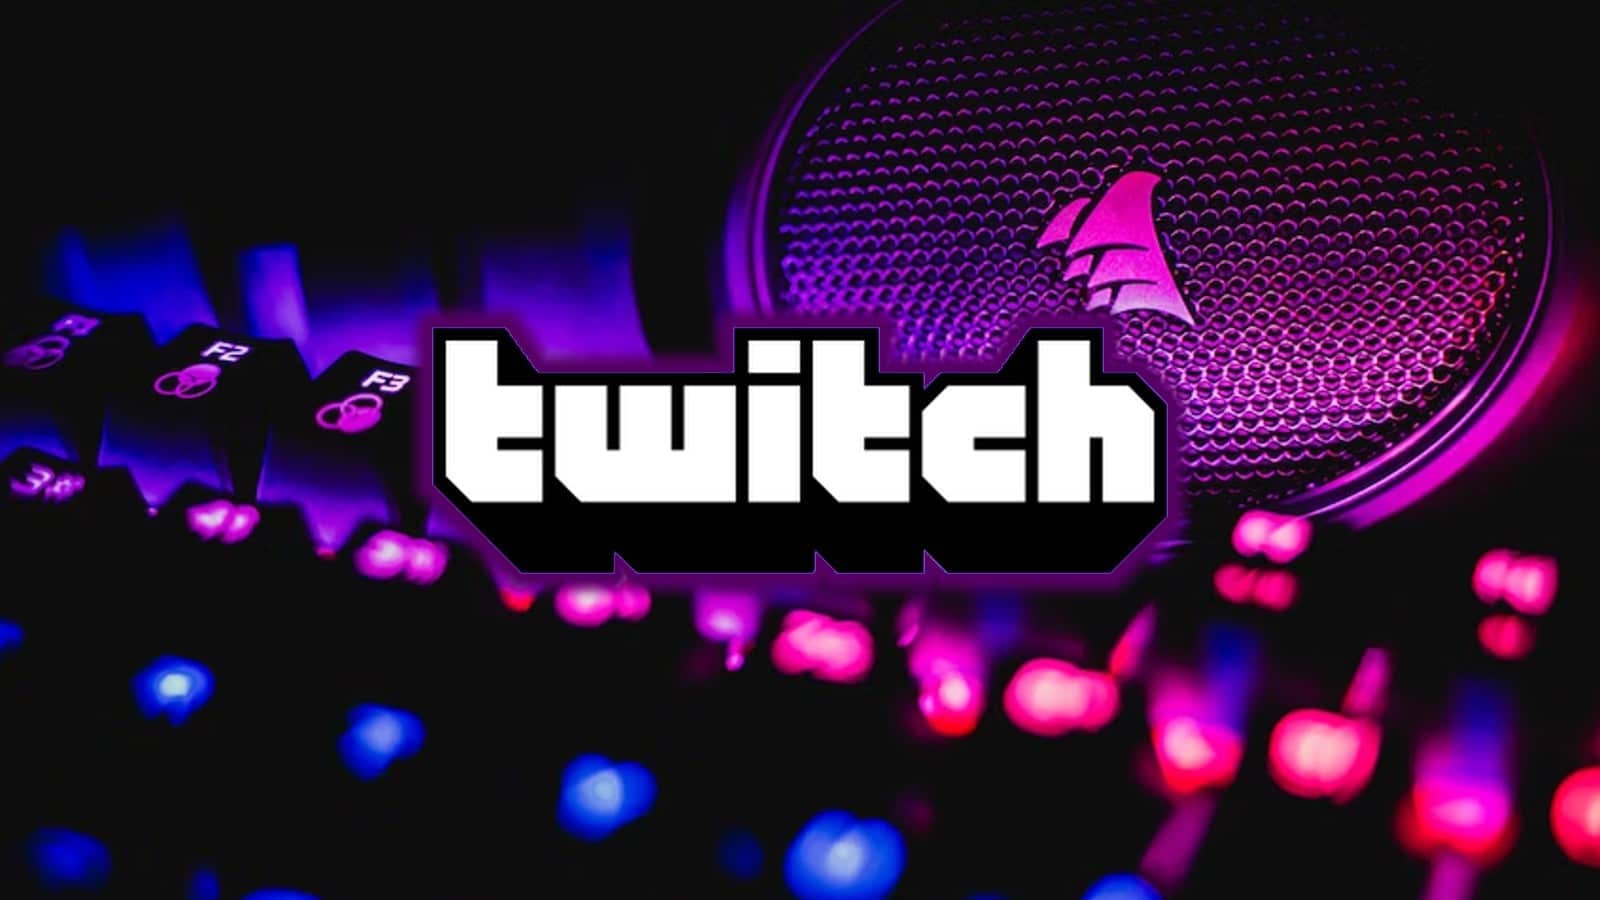 I officially have TWITCH now so I'll be streaming live to some